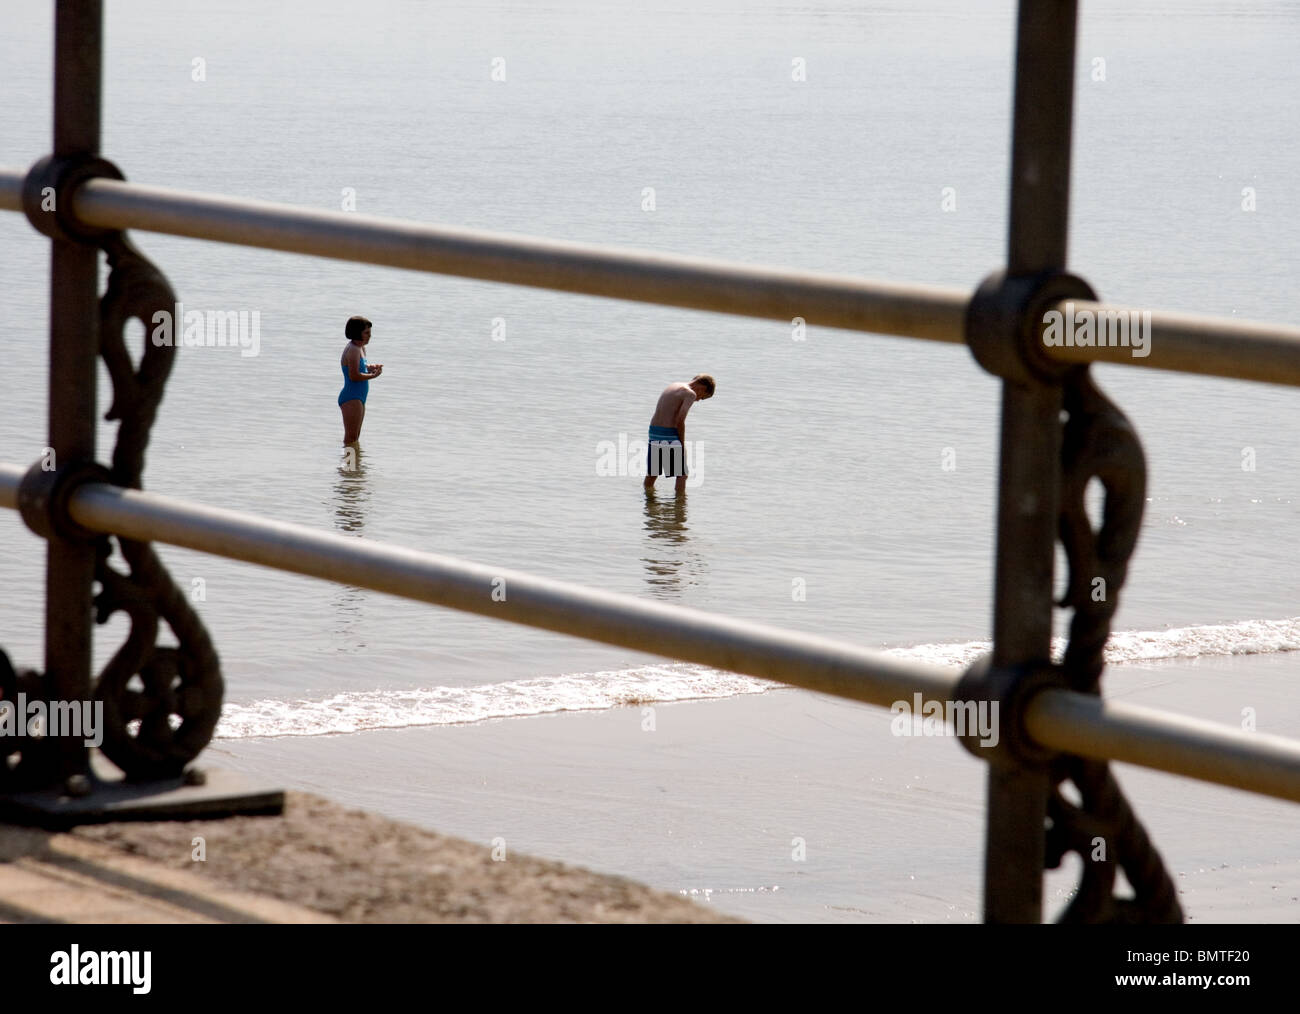 A girl and boy, viewed through pier railings, stand alone in the sea on a spring morning. Stock Photo